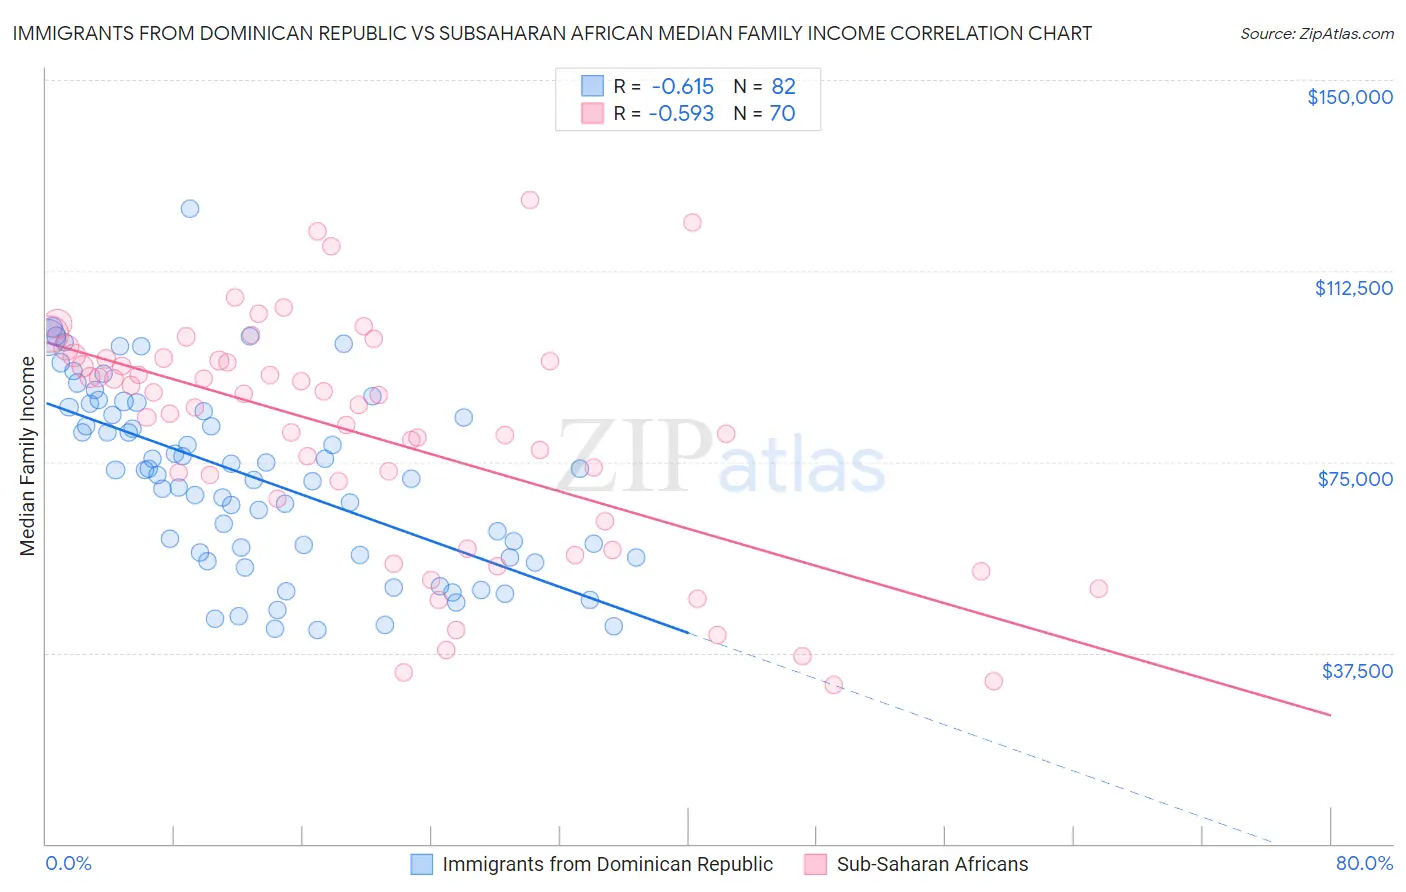 Immigrants from Dominican Republic vs Subsaharan African Median Family Income